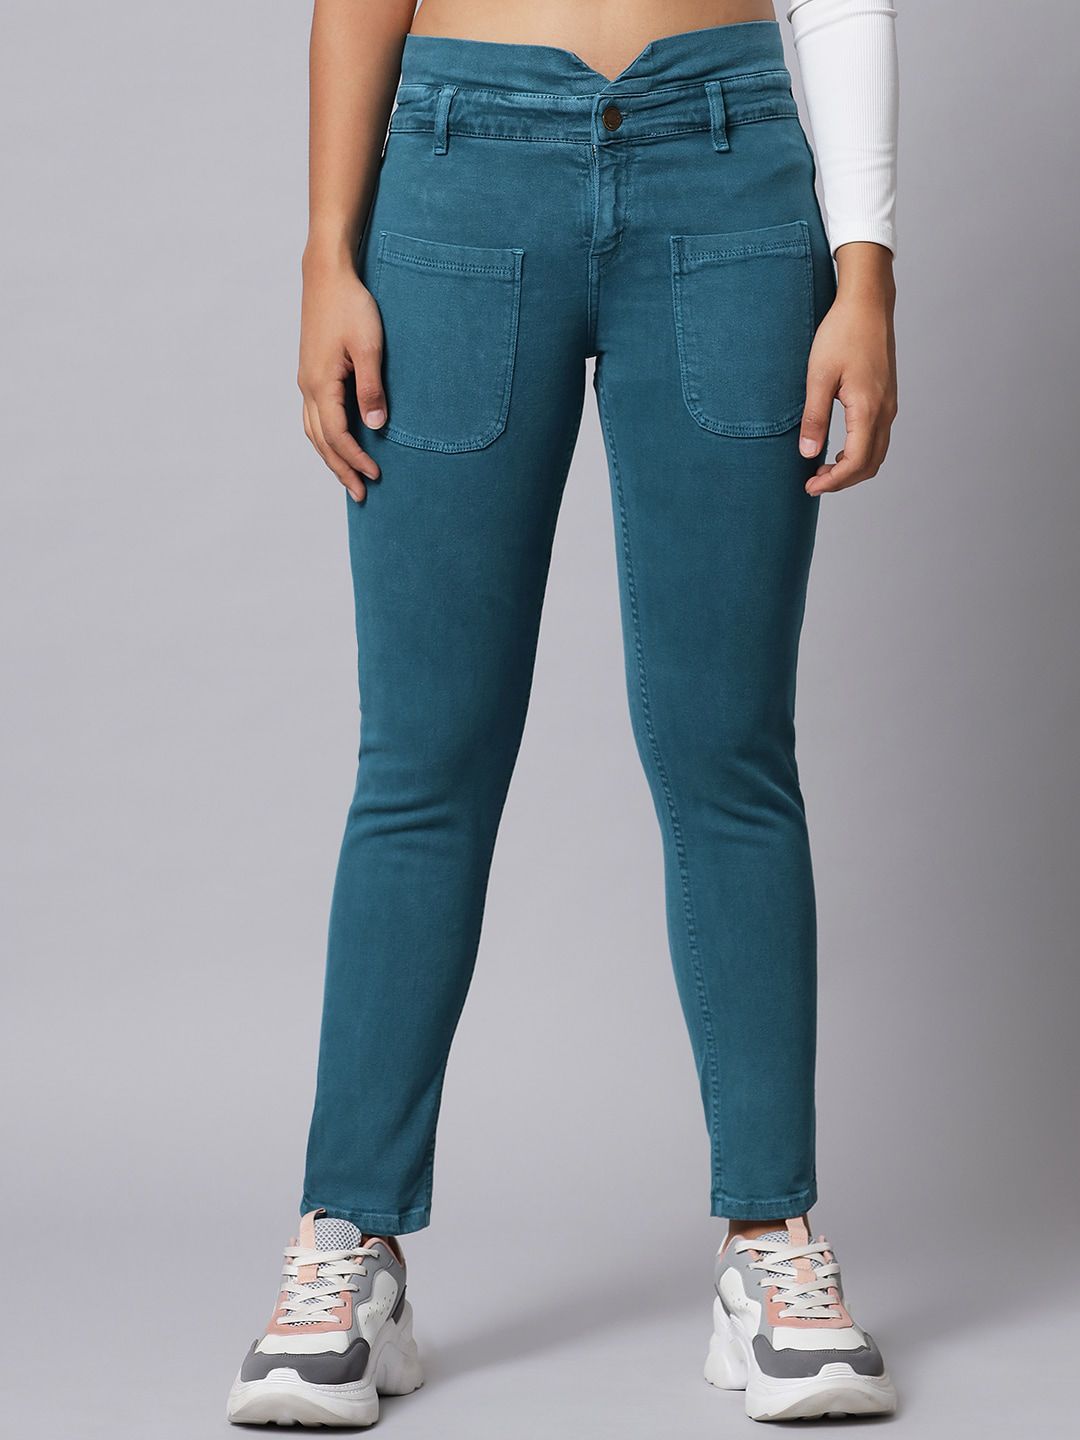 Q-rious Women Green High-Rise Stretchable Jeans Price in India